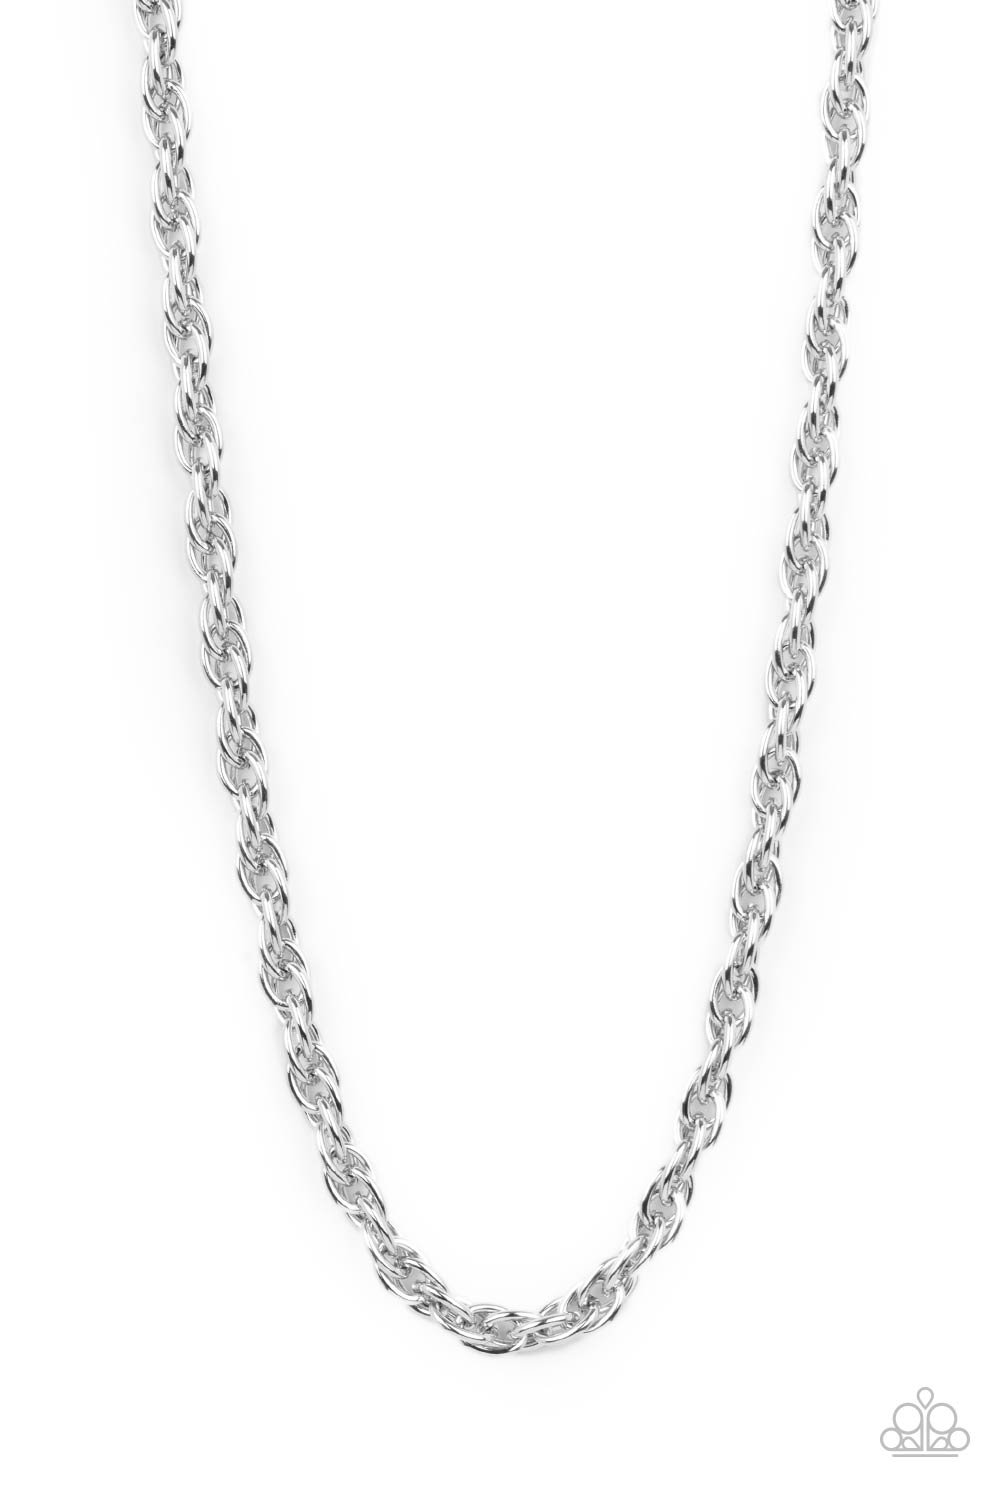 Extra Entrepreneur Silver Urban Necklace - Paparazzi Accessories. Double linked silver ovals spin into a bold silver chain below the collar, creating an intense industrial display. Features an adjustable clasp closure.  All Paparazzi Accessories are lead free and nickel free!  Sold as one individual necklace.  Get The Complete Look! Bracelet: "Executive Exclusive - Silver" (Sold Separately)